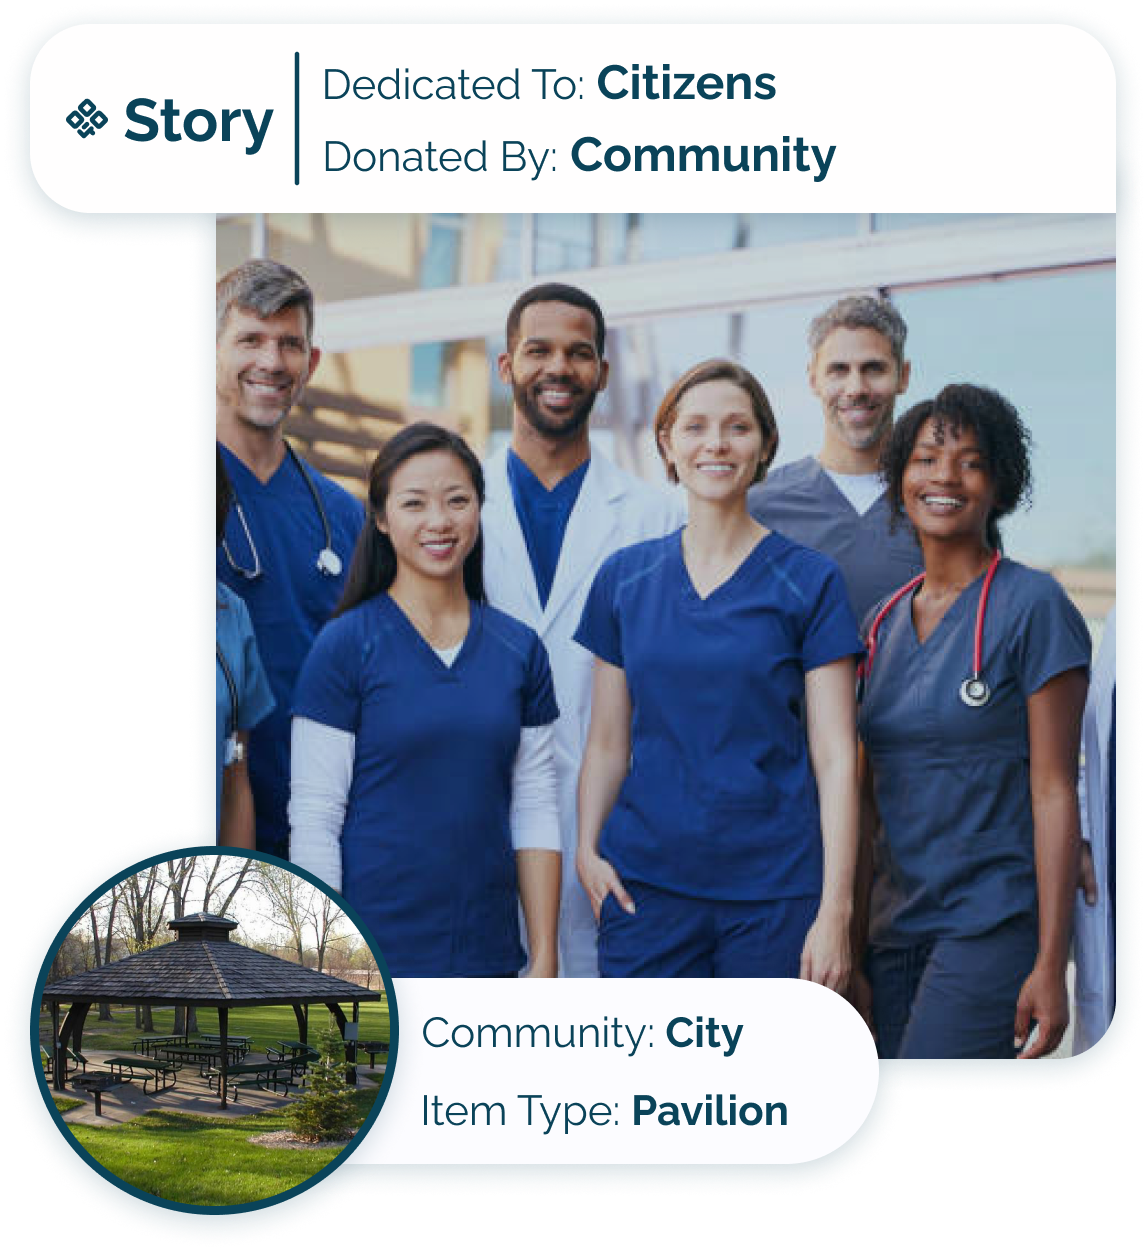 Story Card - City - Community dedicating pavilion to their local heroes